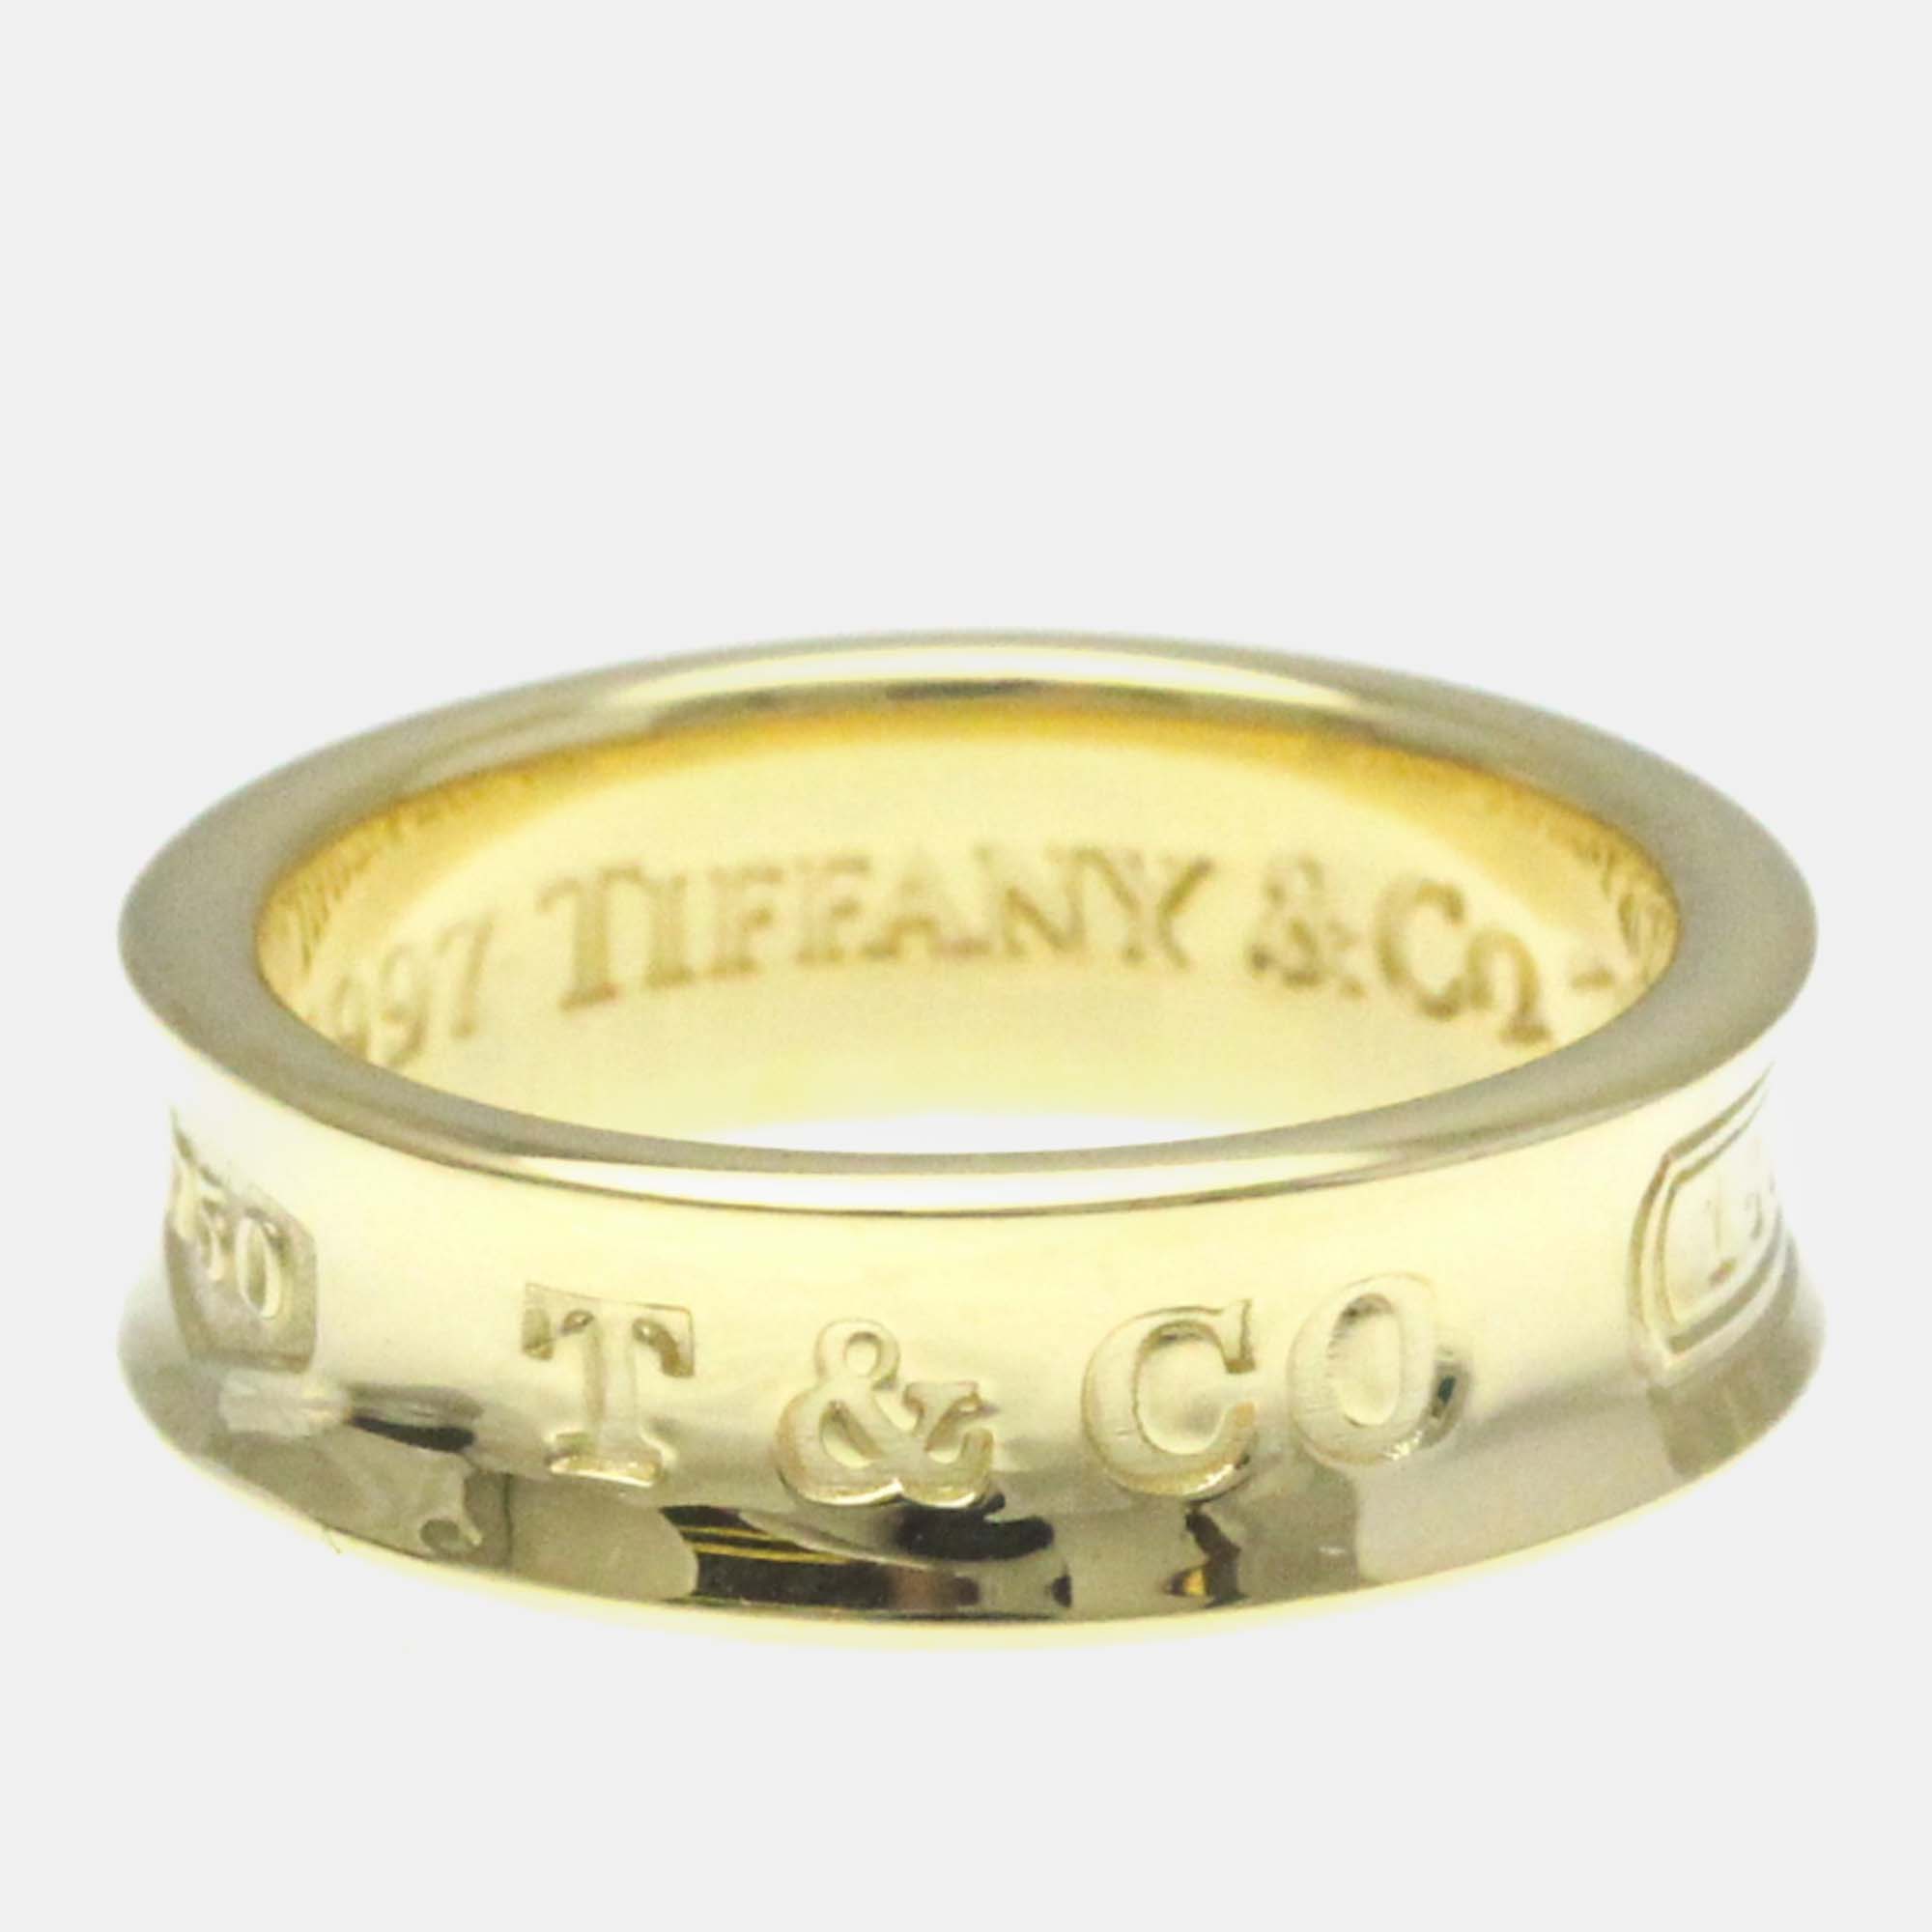 Pre-owned Tiffany & Co 18k Yellow Gold 1837 Band Ring Eu 51